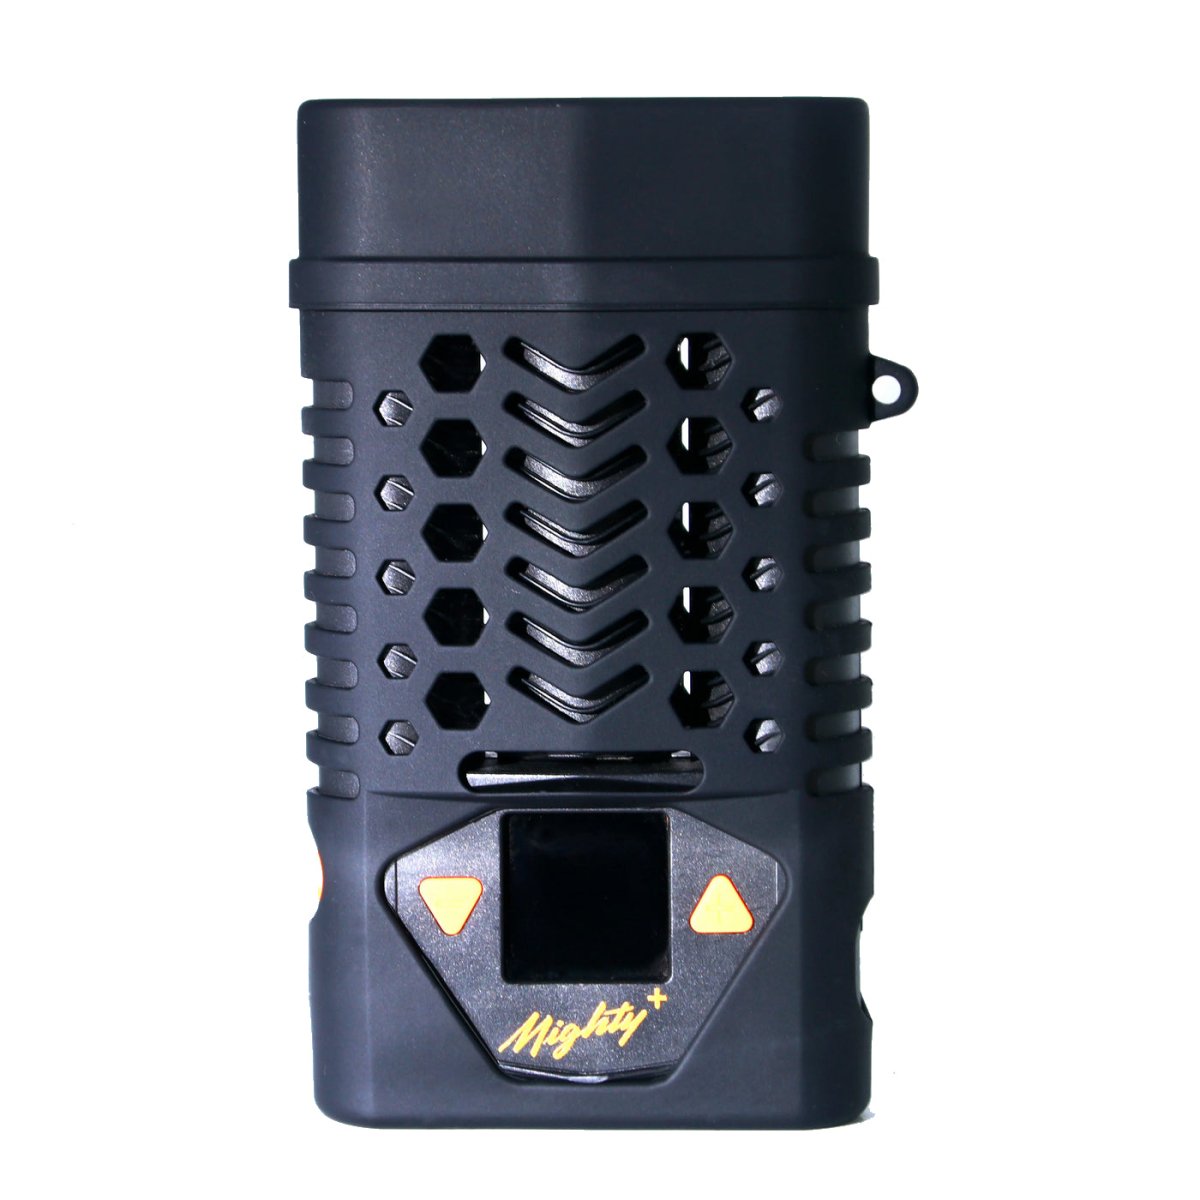 Silicon Protection Case for Mighty+ Vaporizer - Vapefiend UK